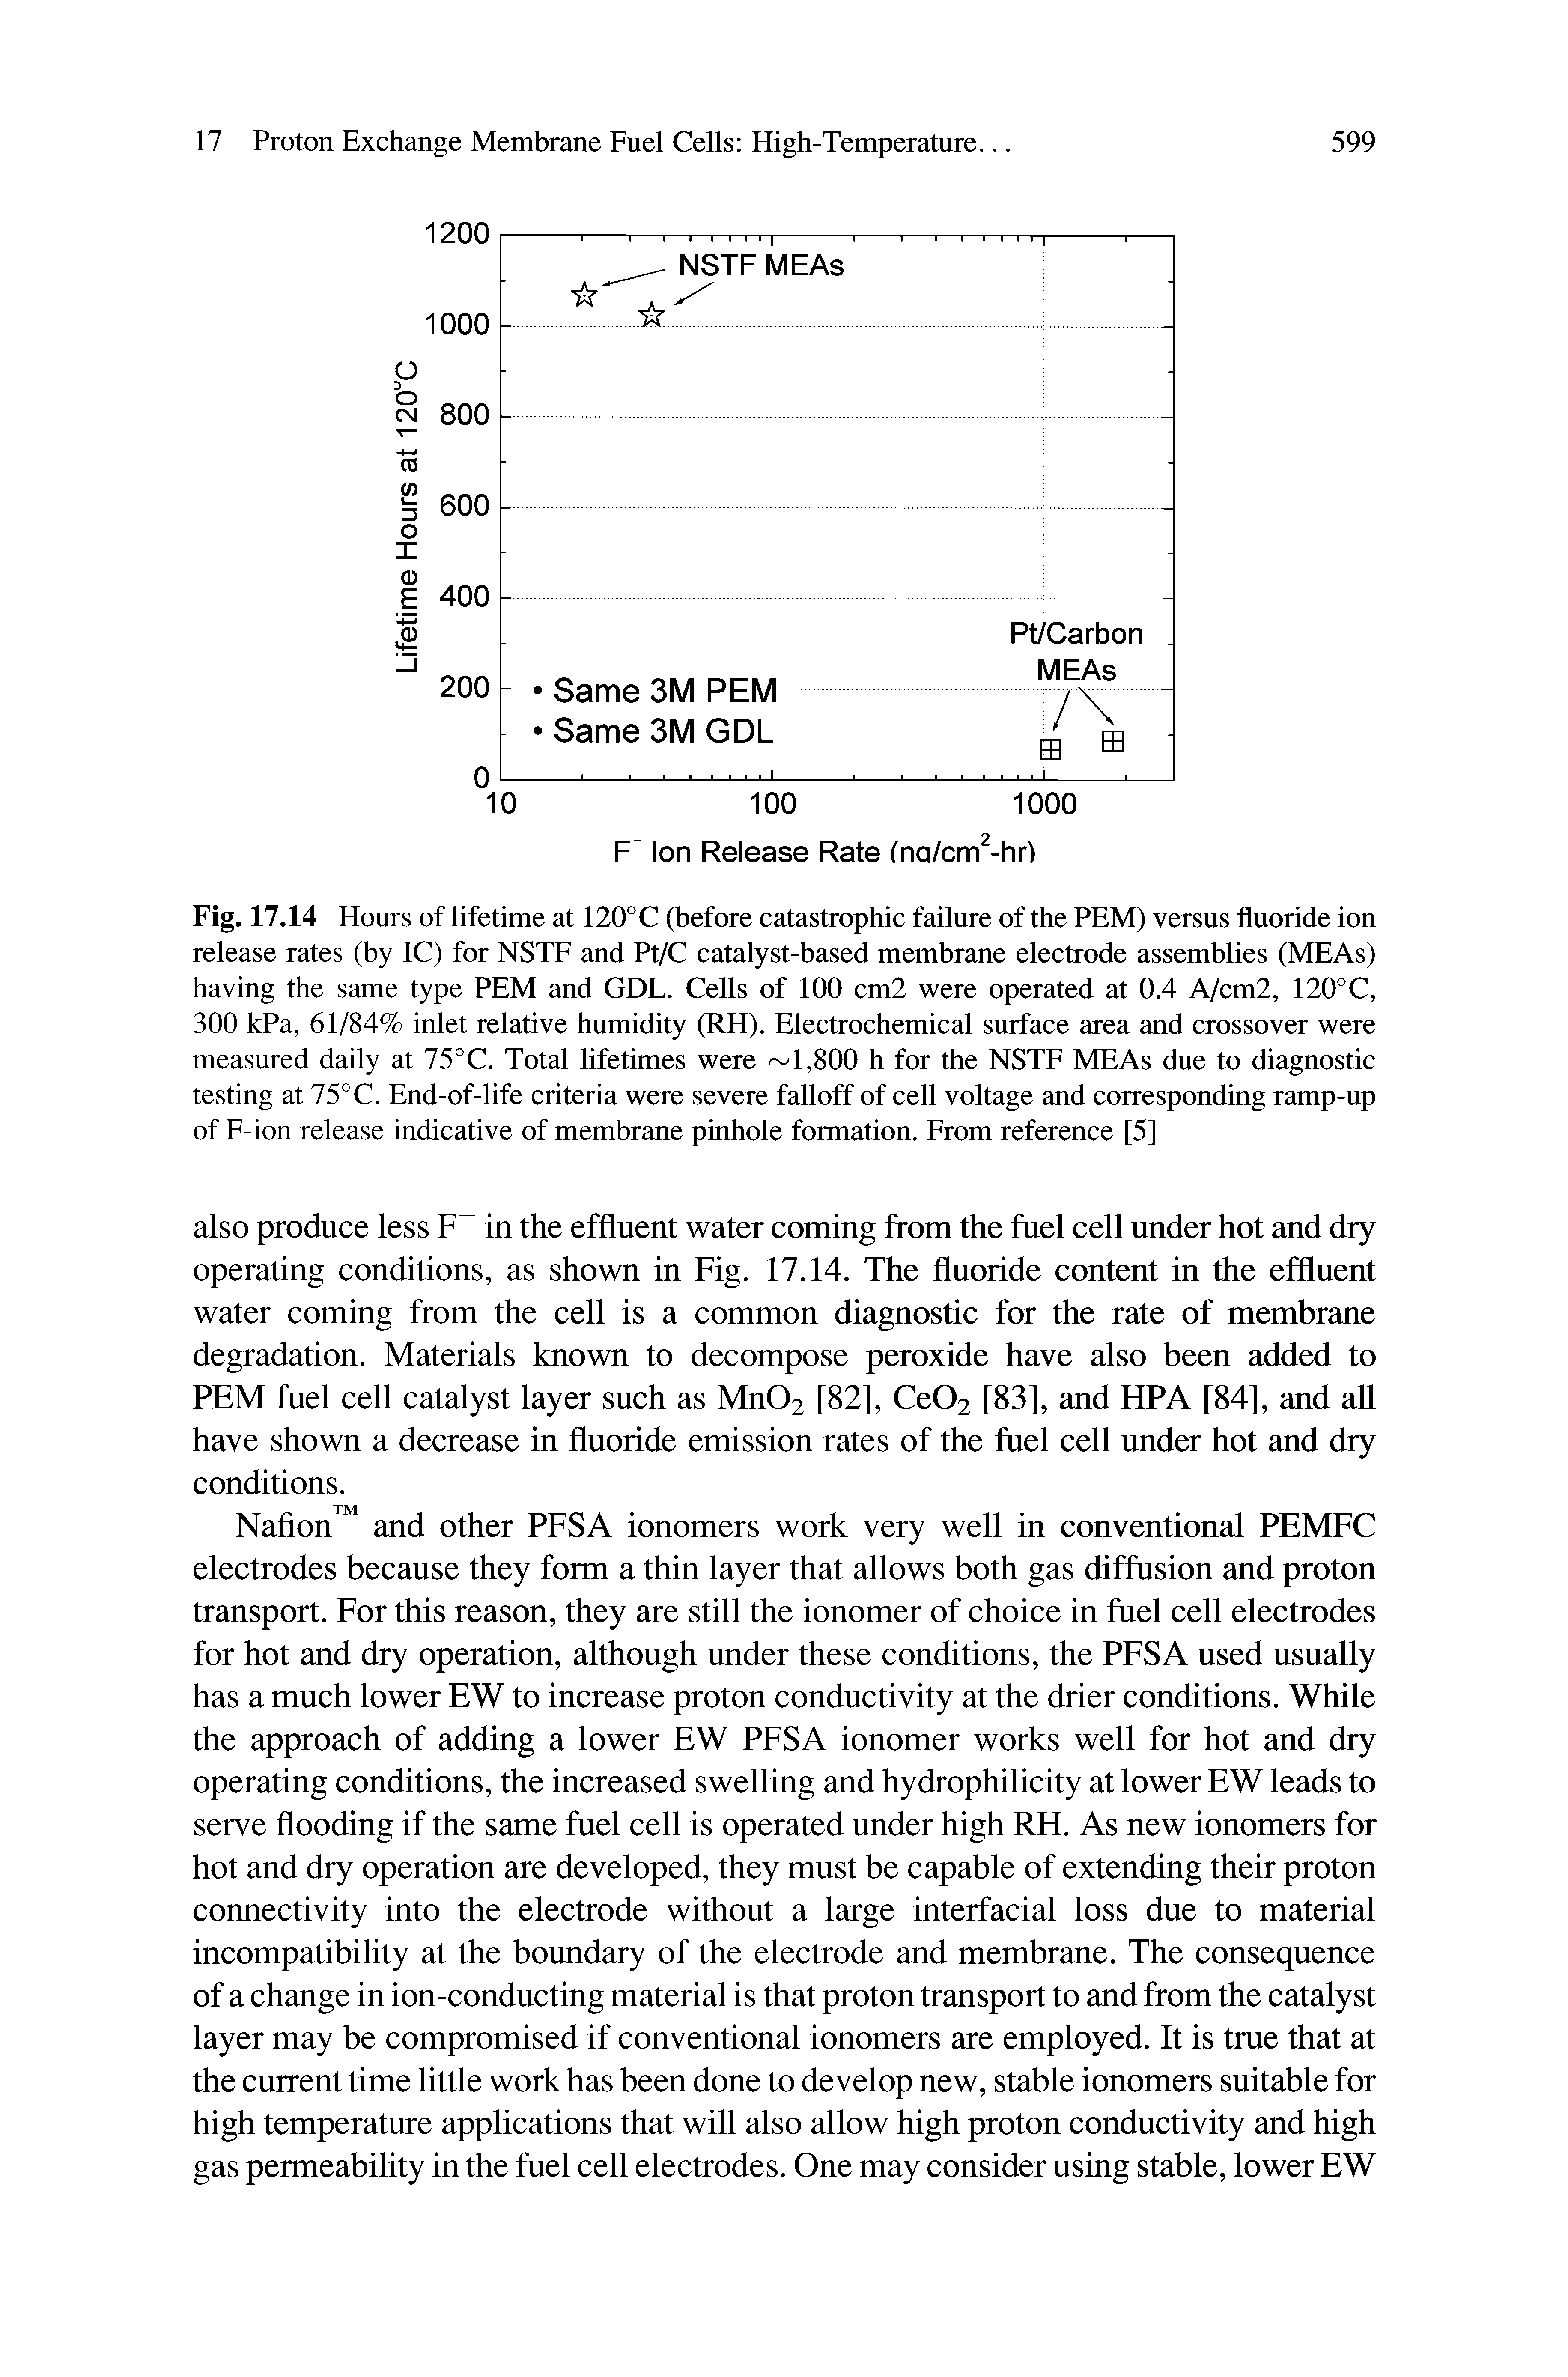 Fig. 17.14 Hours of lifetime at 120°C (before catastrophic failure of the PEM) versus fluoride ion release rates (by IC) for NSTF and Pt/C catalyst-based membrane electrode assemblies (MEAs) having the same type PEM and GDL. Cells of 100 cm2 were operated at 0.4 A/cm2, 120°C, 300 kPa, 61/84% inlet relative humidity (RH). Electrochemical surface area and crossover were measured daily at 75°C. Total lifetimes were -- CSOO h for the NSTF MEAs due to diagnostic testing at 75°C. End-of-life criteria were severe falloff of cell voltage and corresponding ramp-up of F-ion release indicative of membrane pinhole formation. From reference [5]...